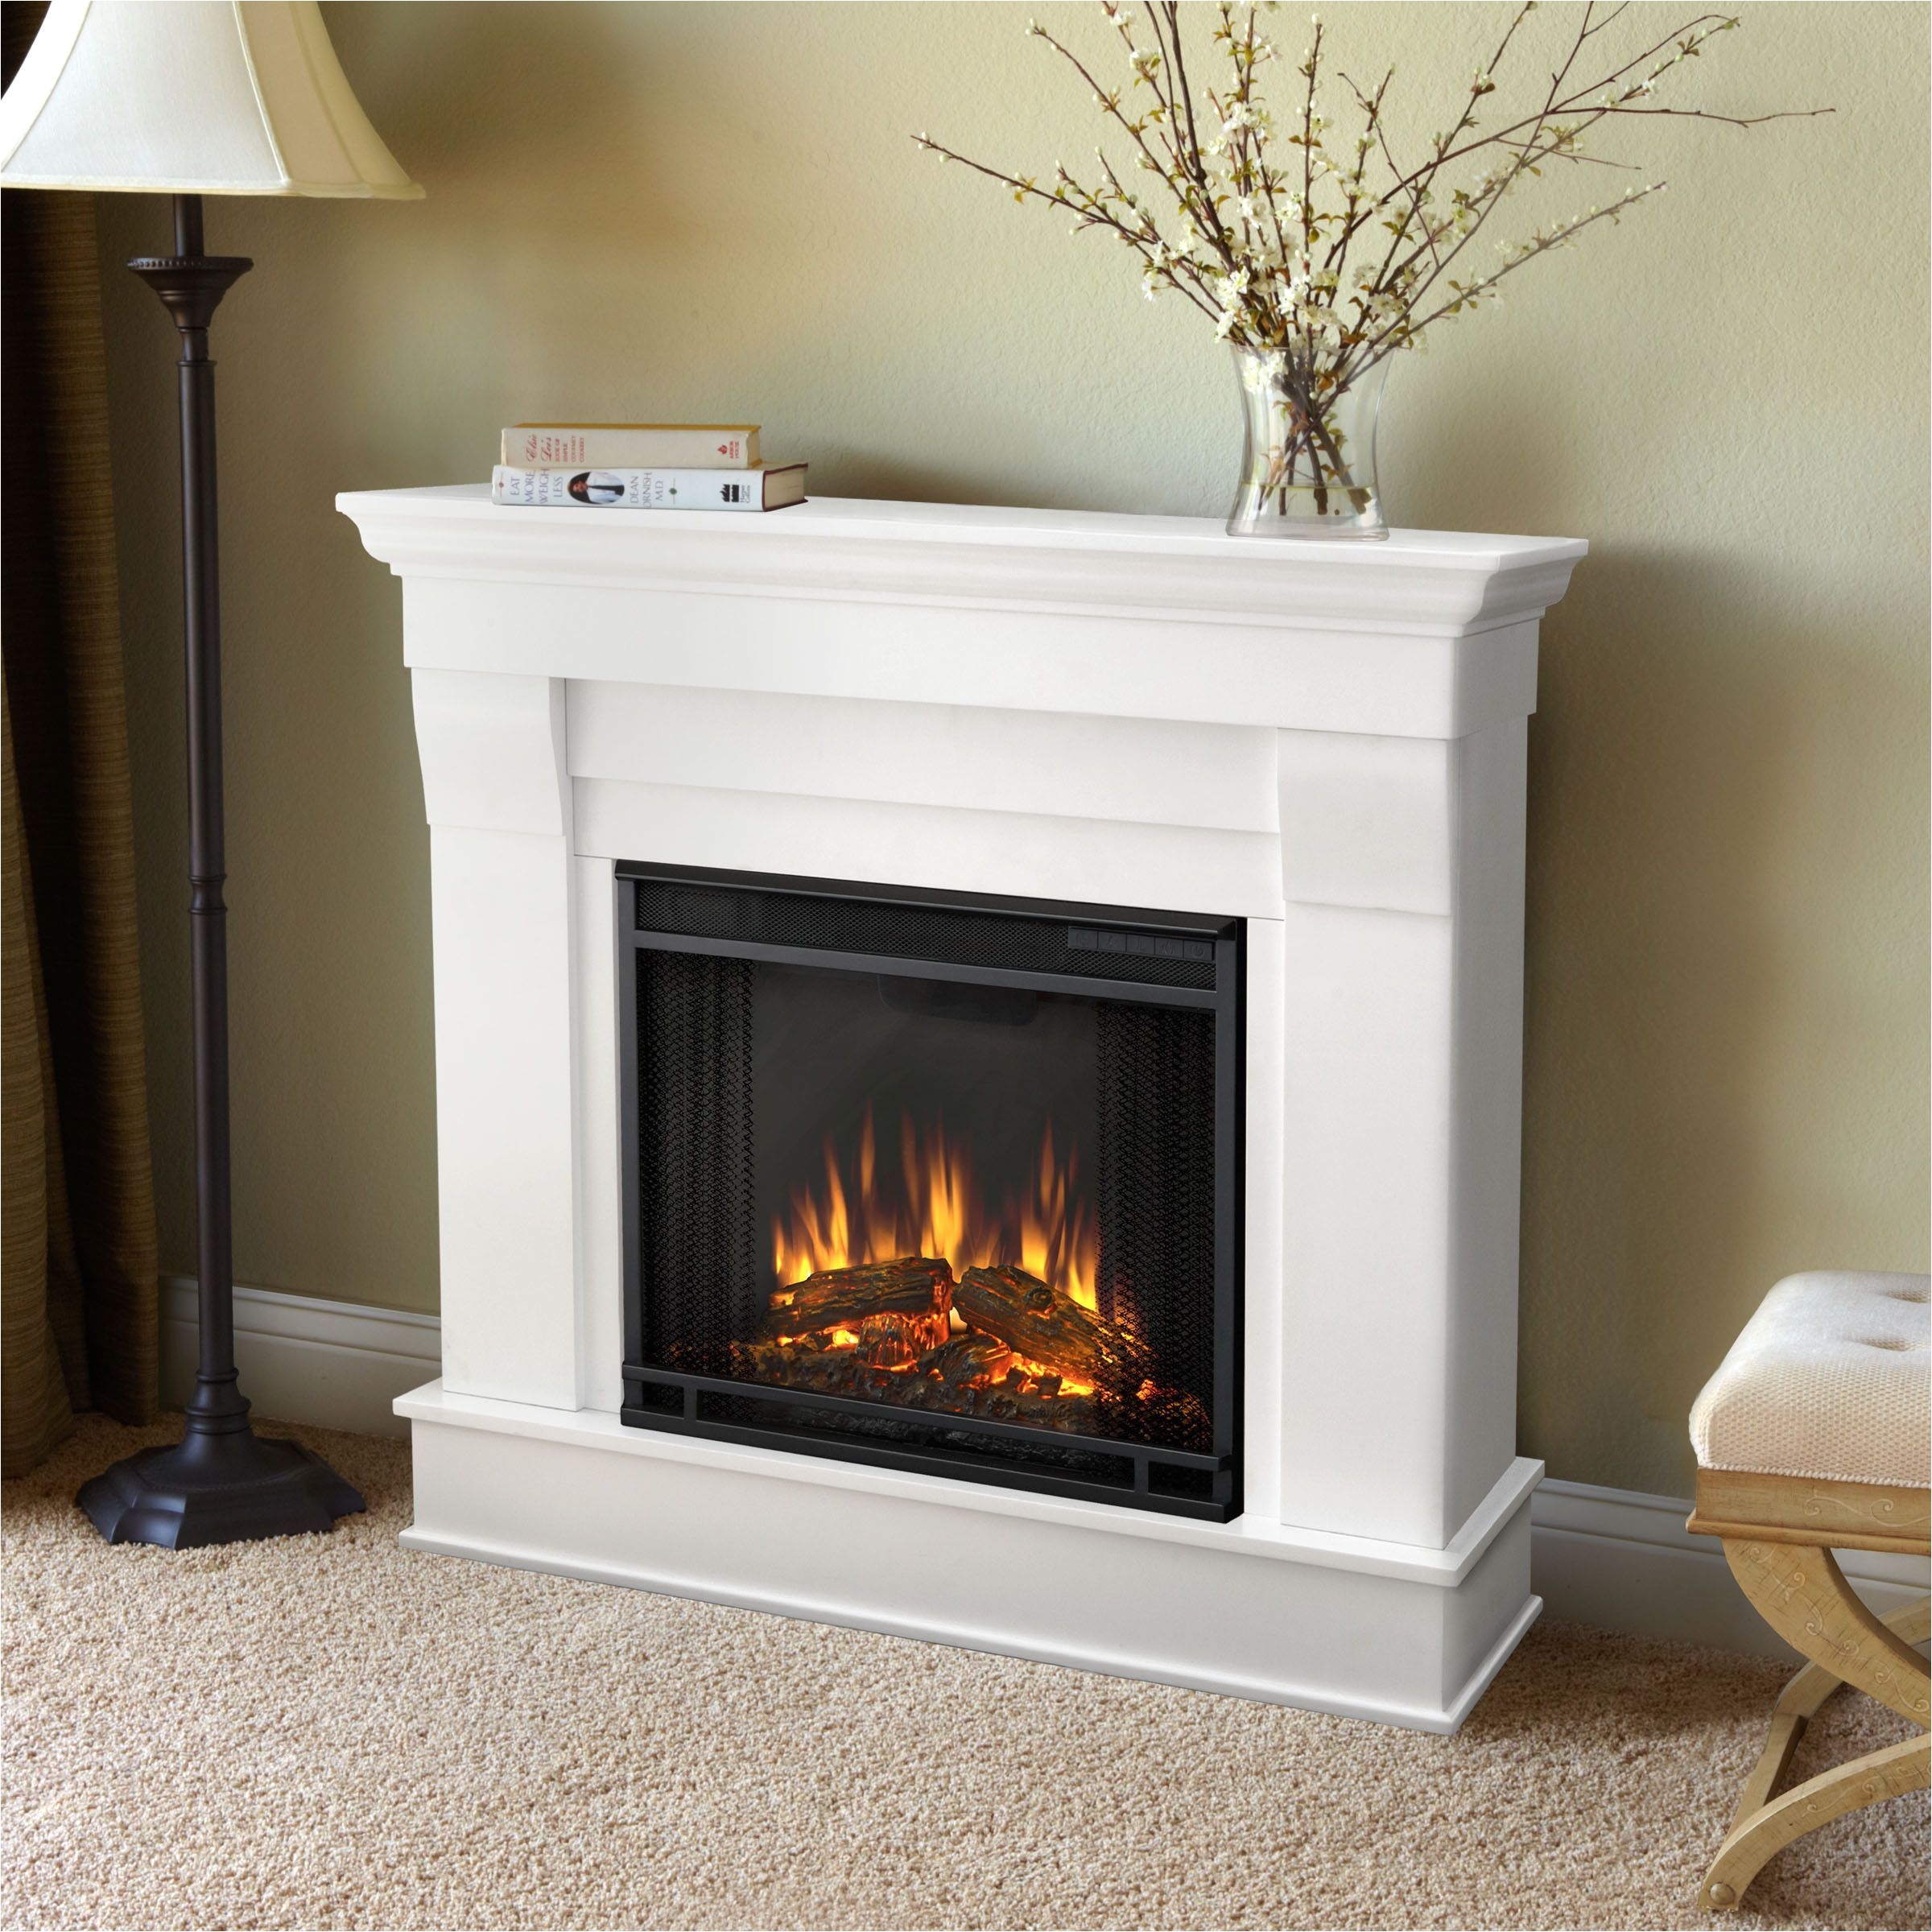 Fake Fireplace Mantel Inspirational Fake Fire Picture for Fireplace Real Flame Chateau Electric